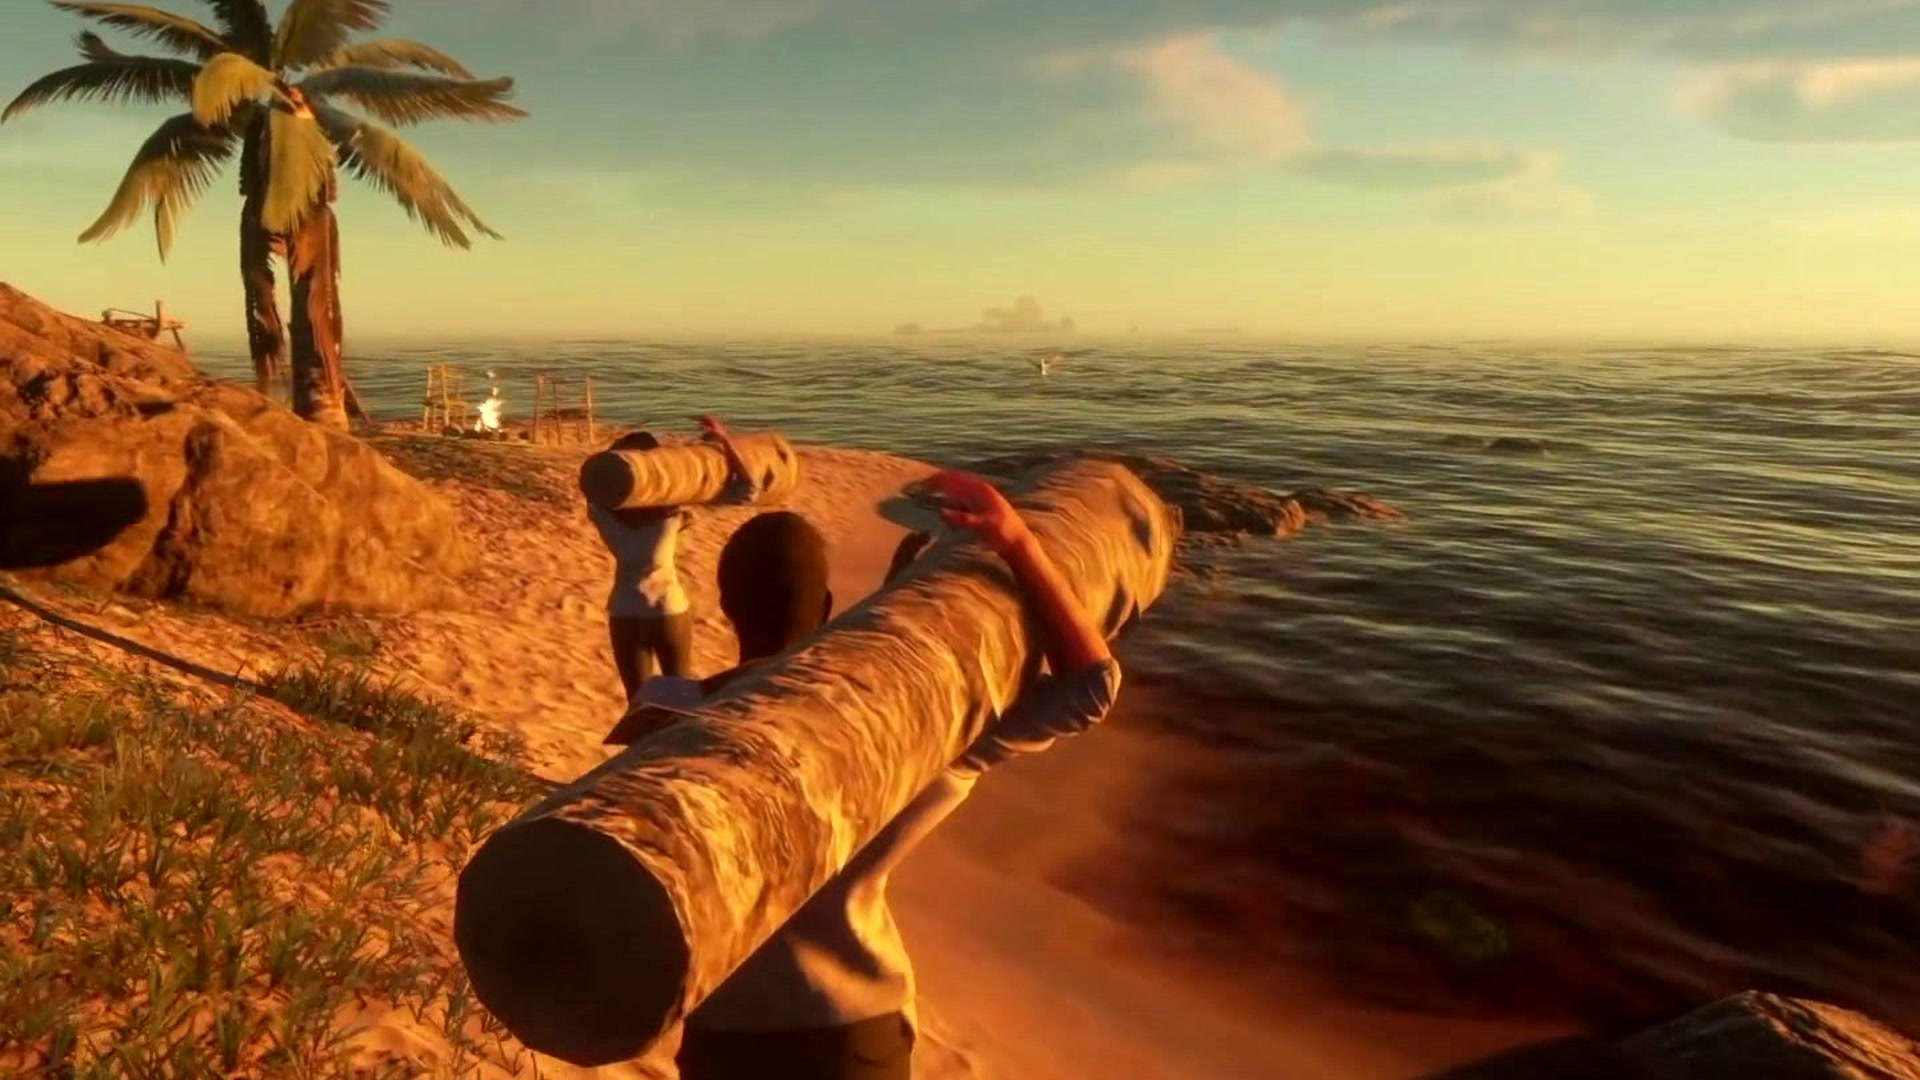 Stranded Deep trailer showcases upcoming co-op, Culture